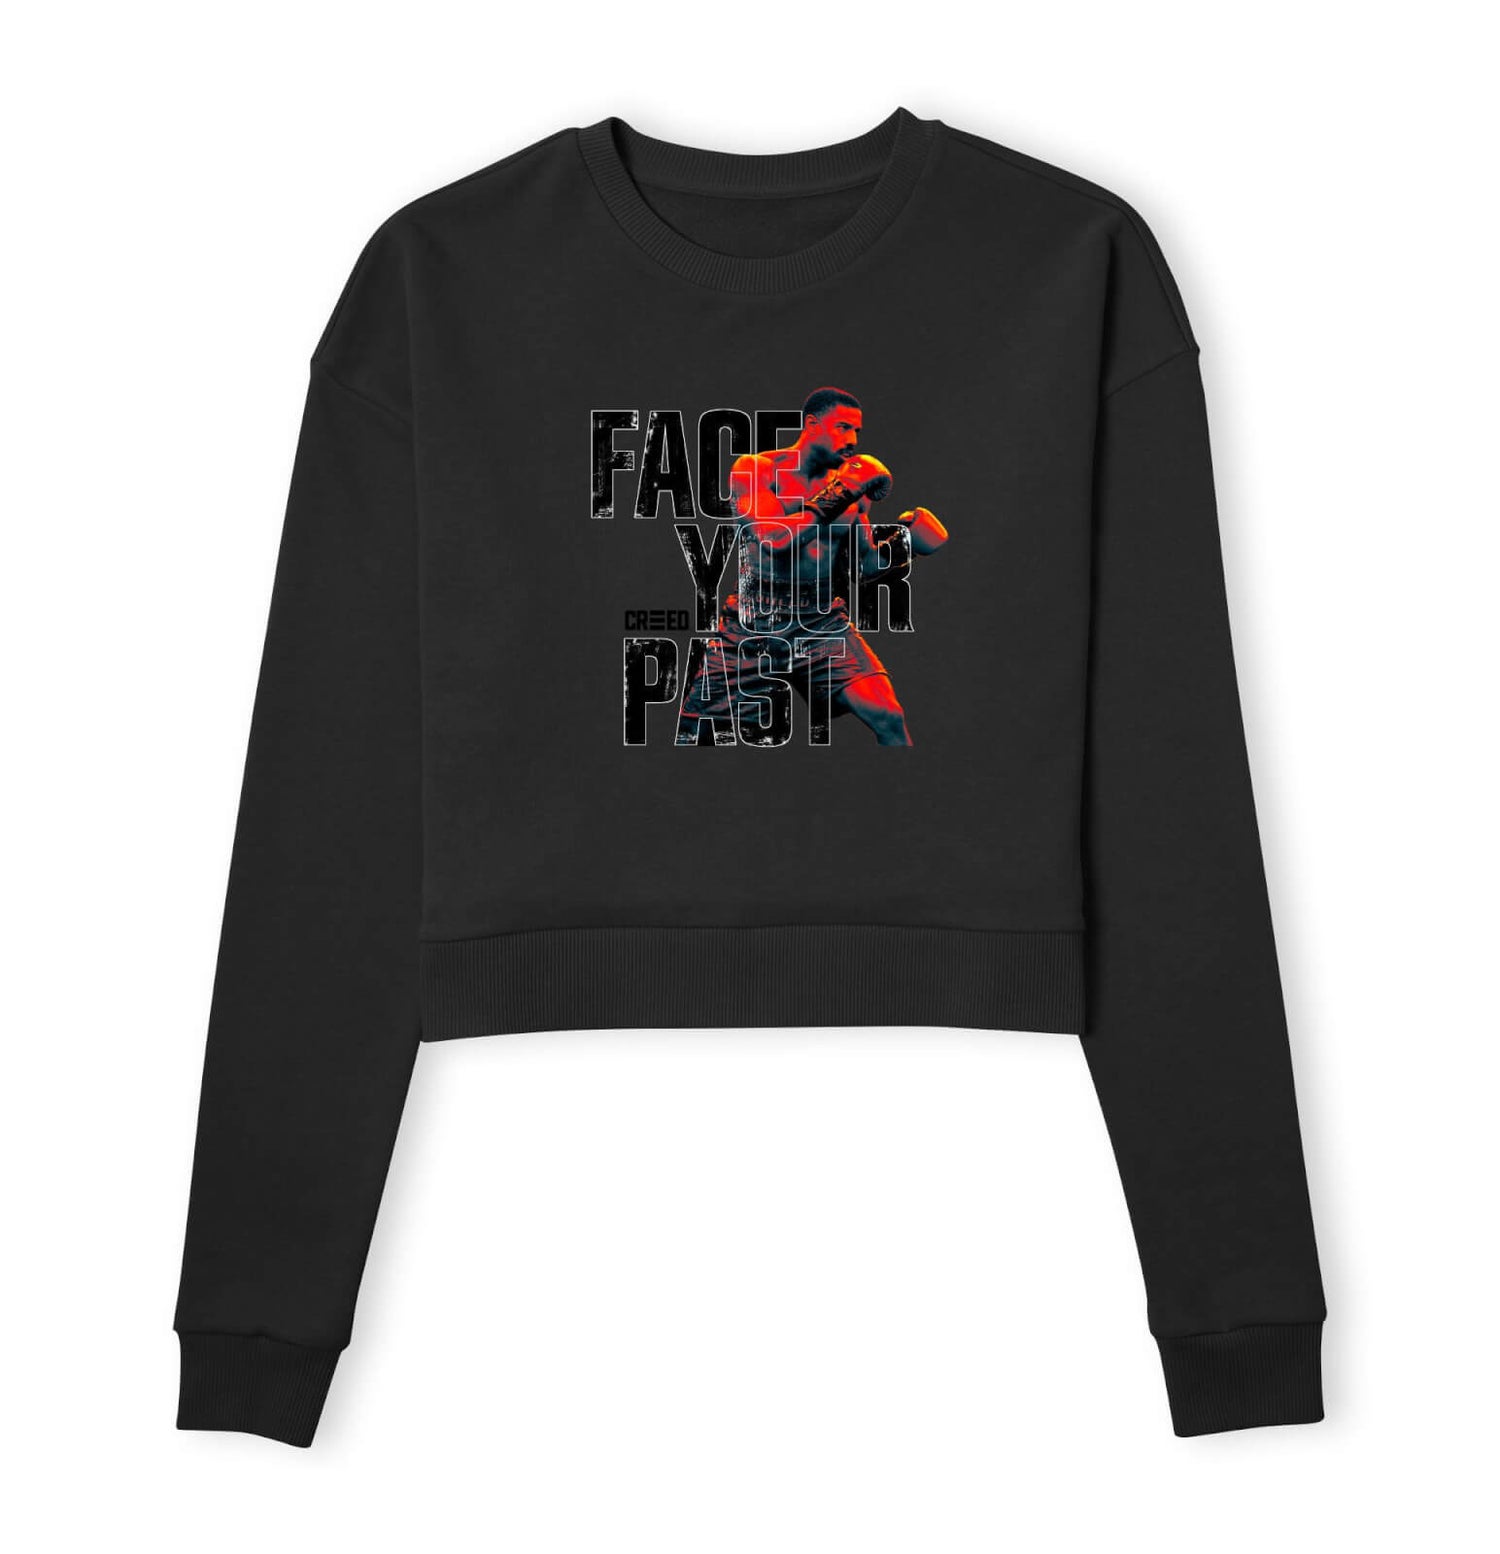 Creed Face Your Past Women's Cropped Sweatshirt - Black - XS